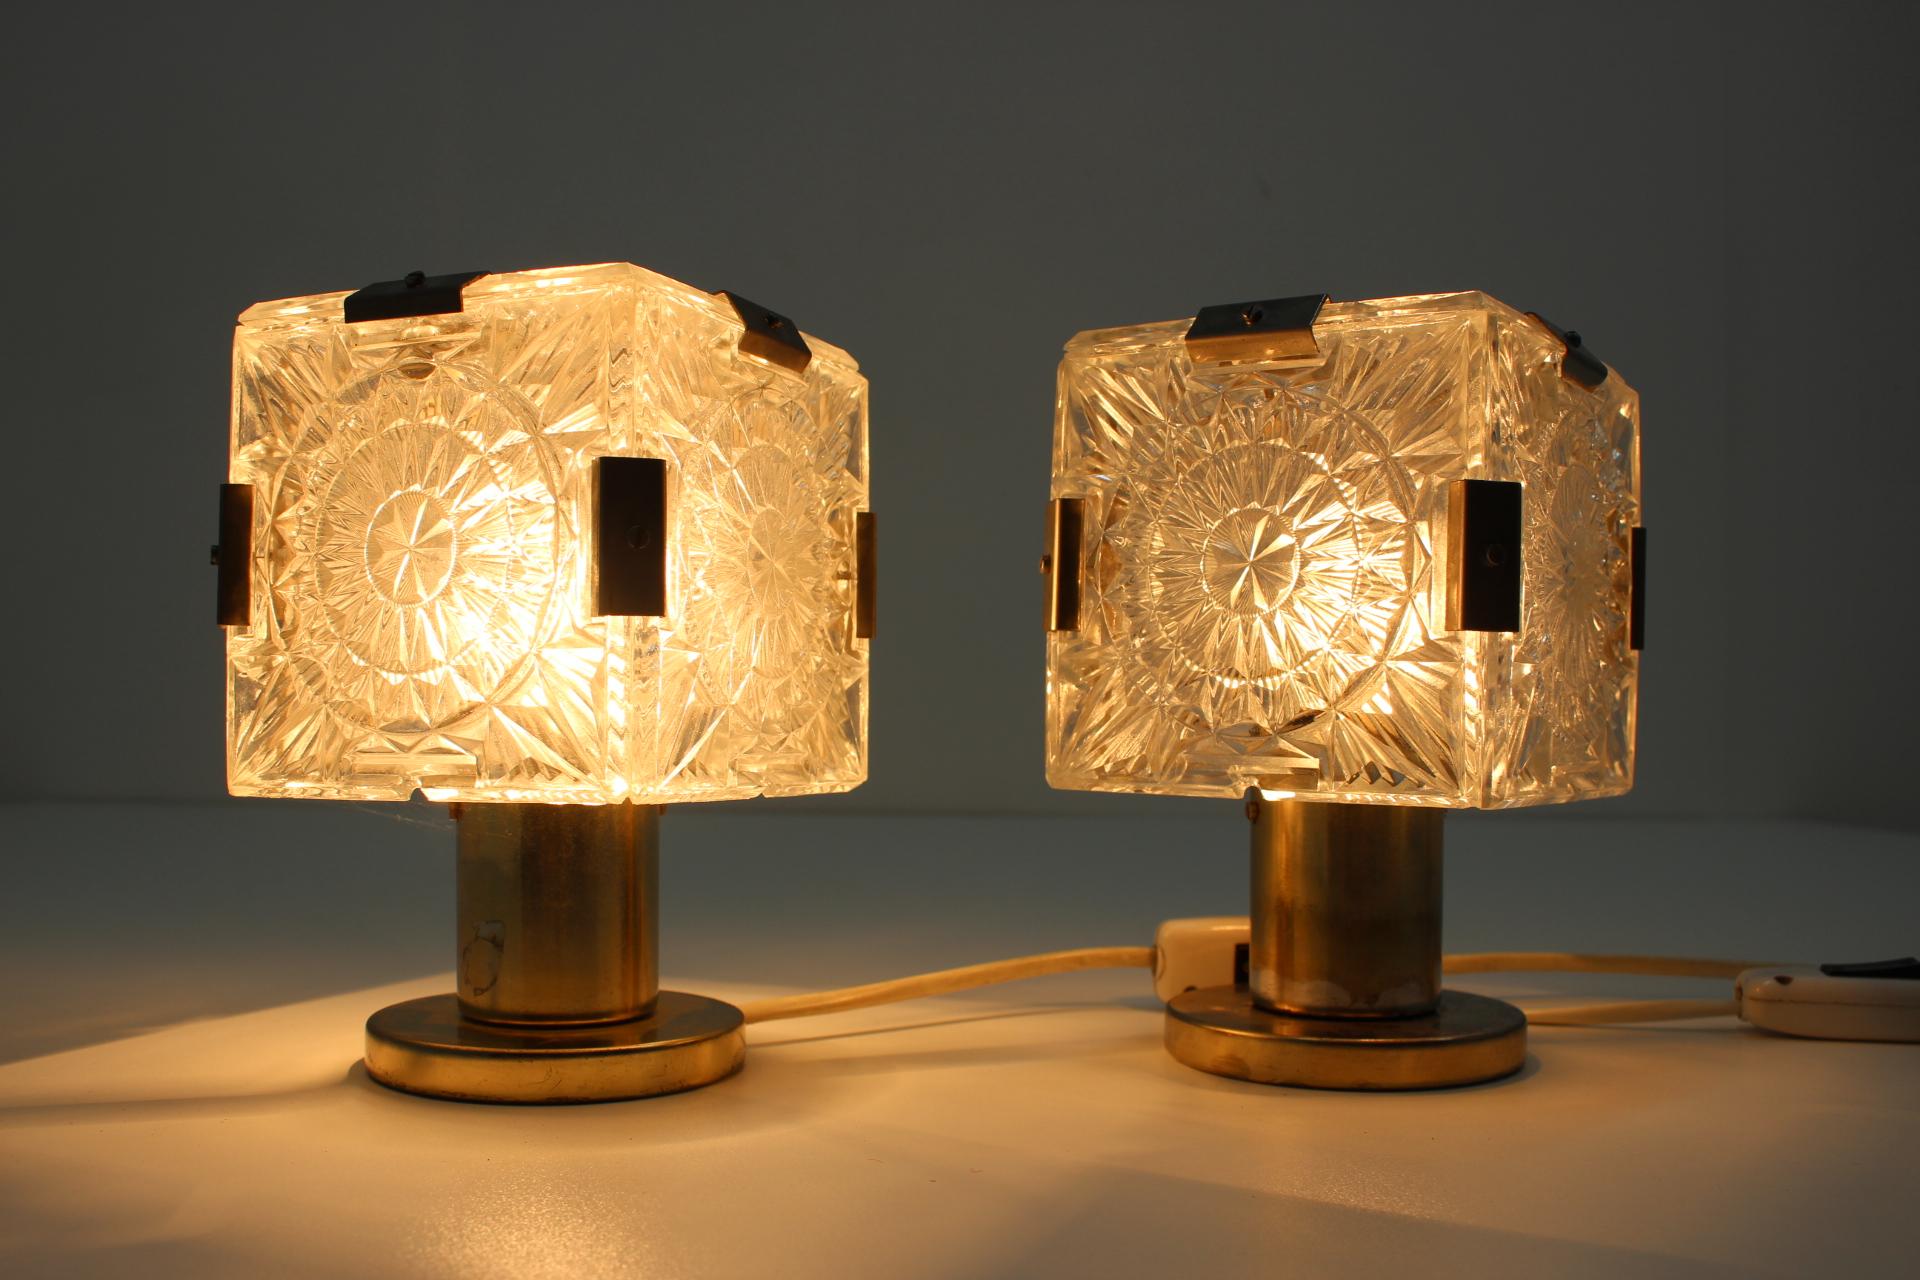 Czech Pair of Midcentury Design Table Lamps, 1970s